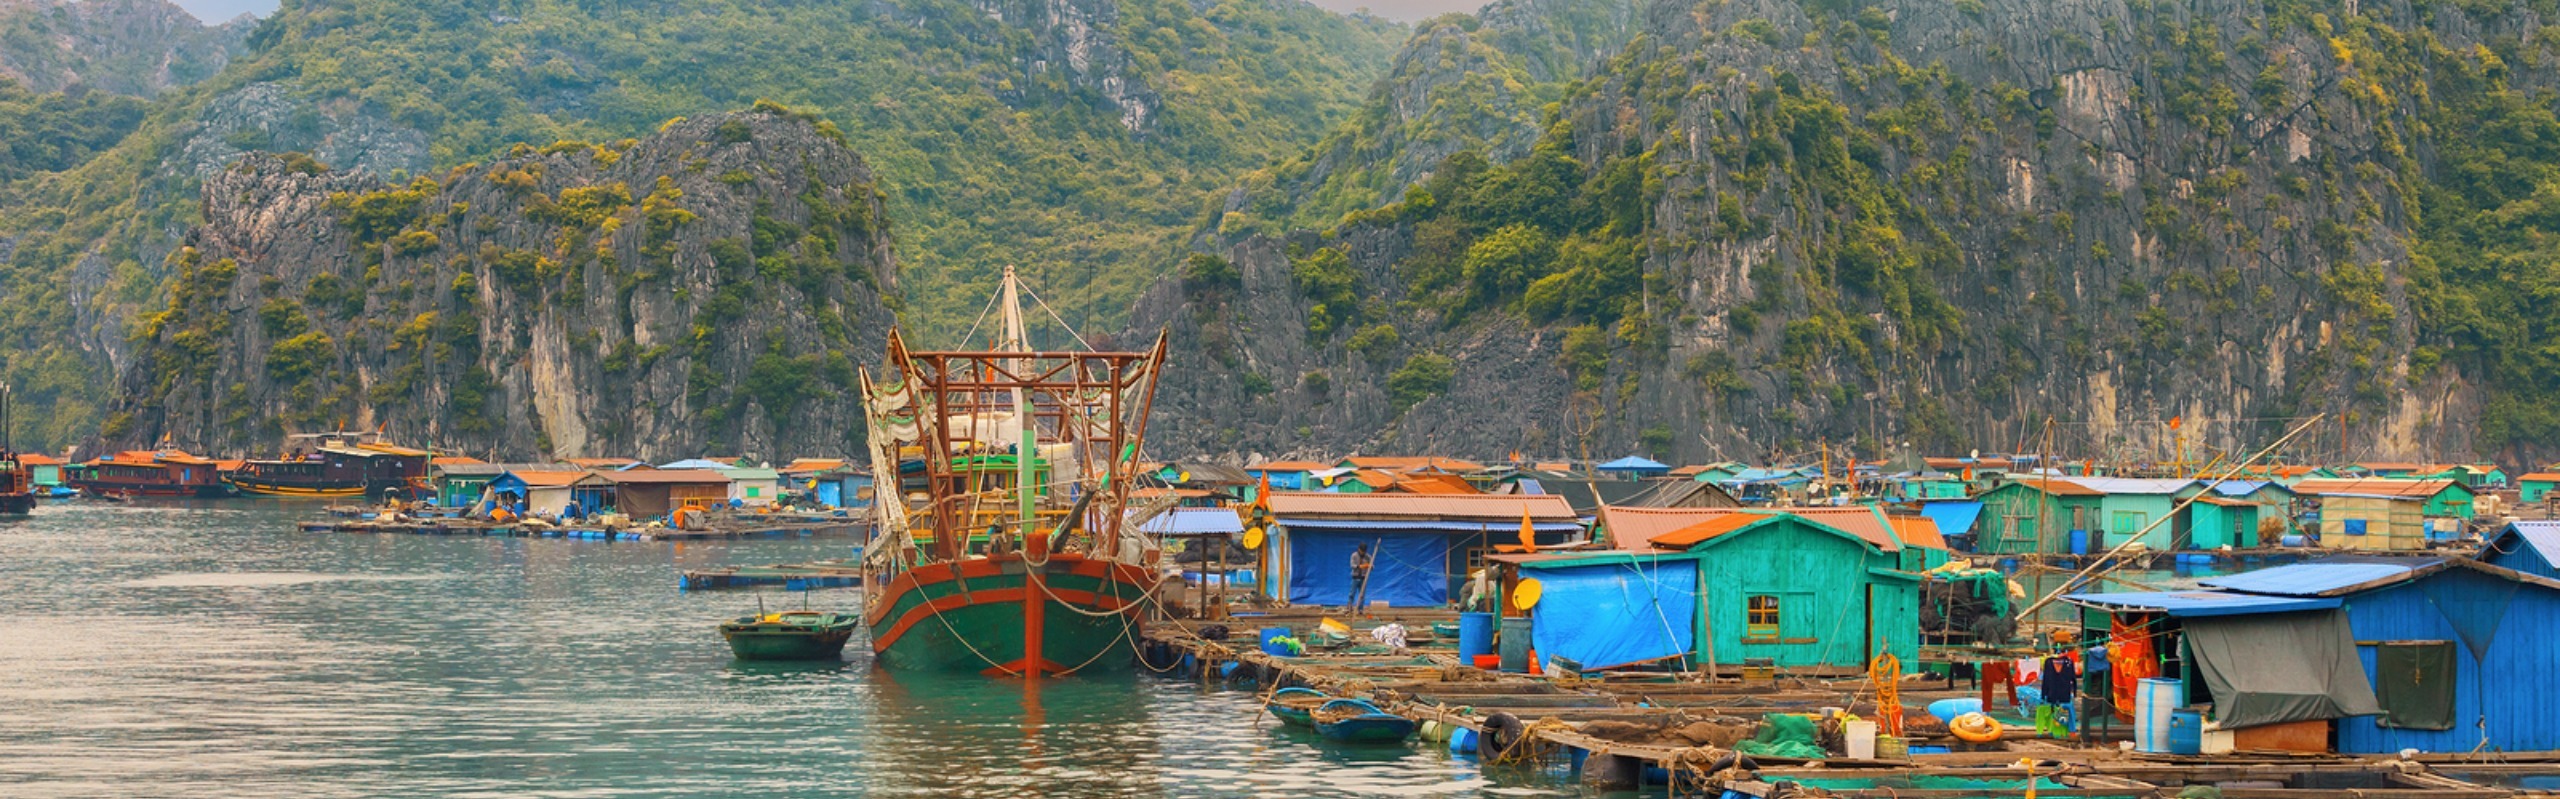 2 Weeks/14 Days in Vietnam: Top 5 Itineraries (with map and Insider Tips)